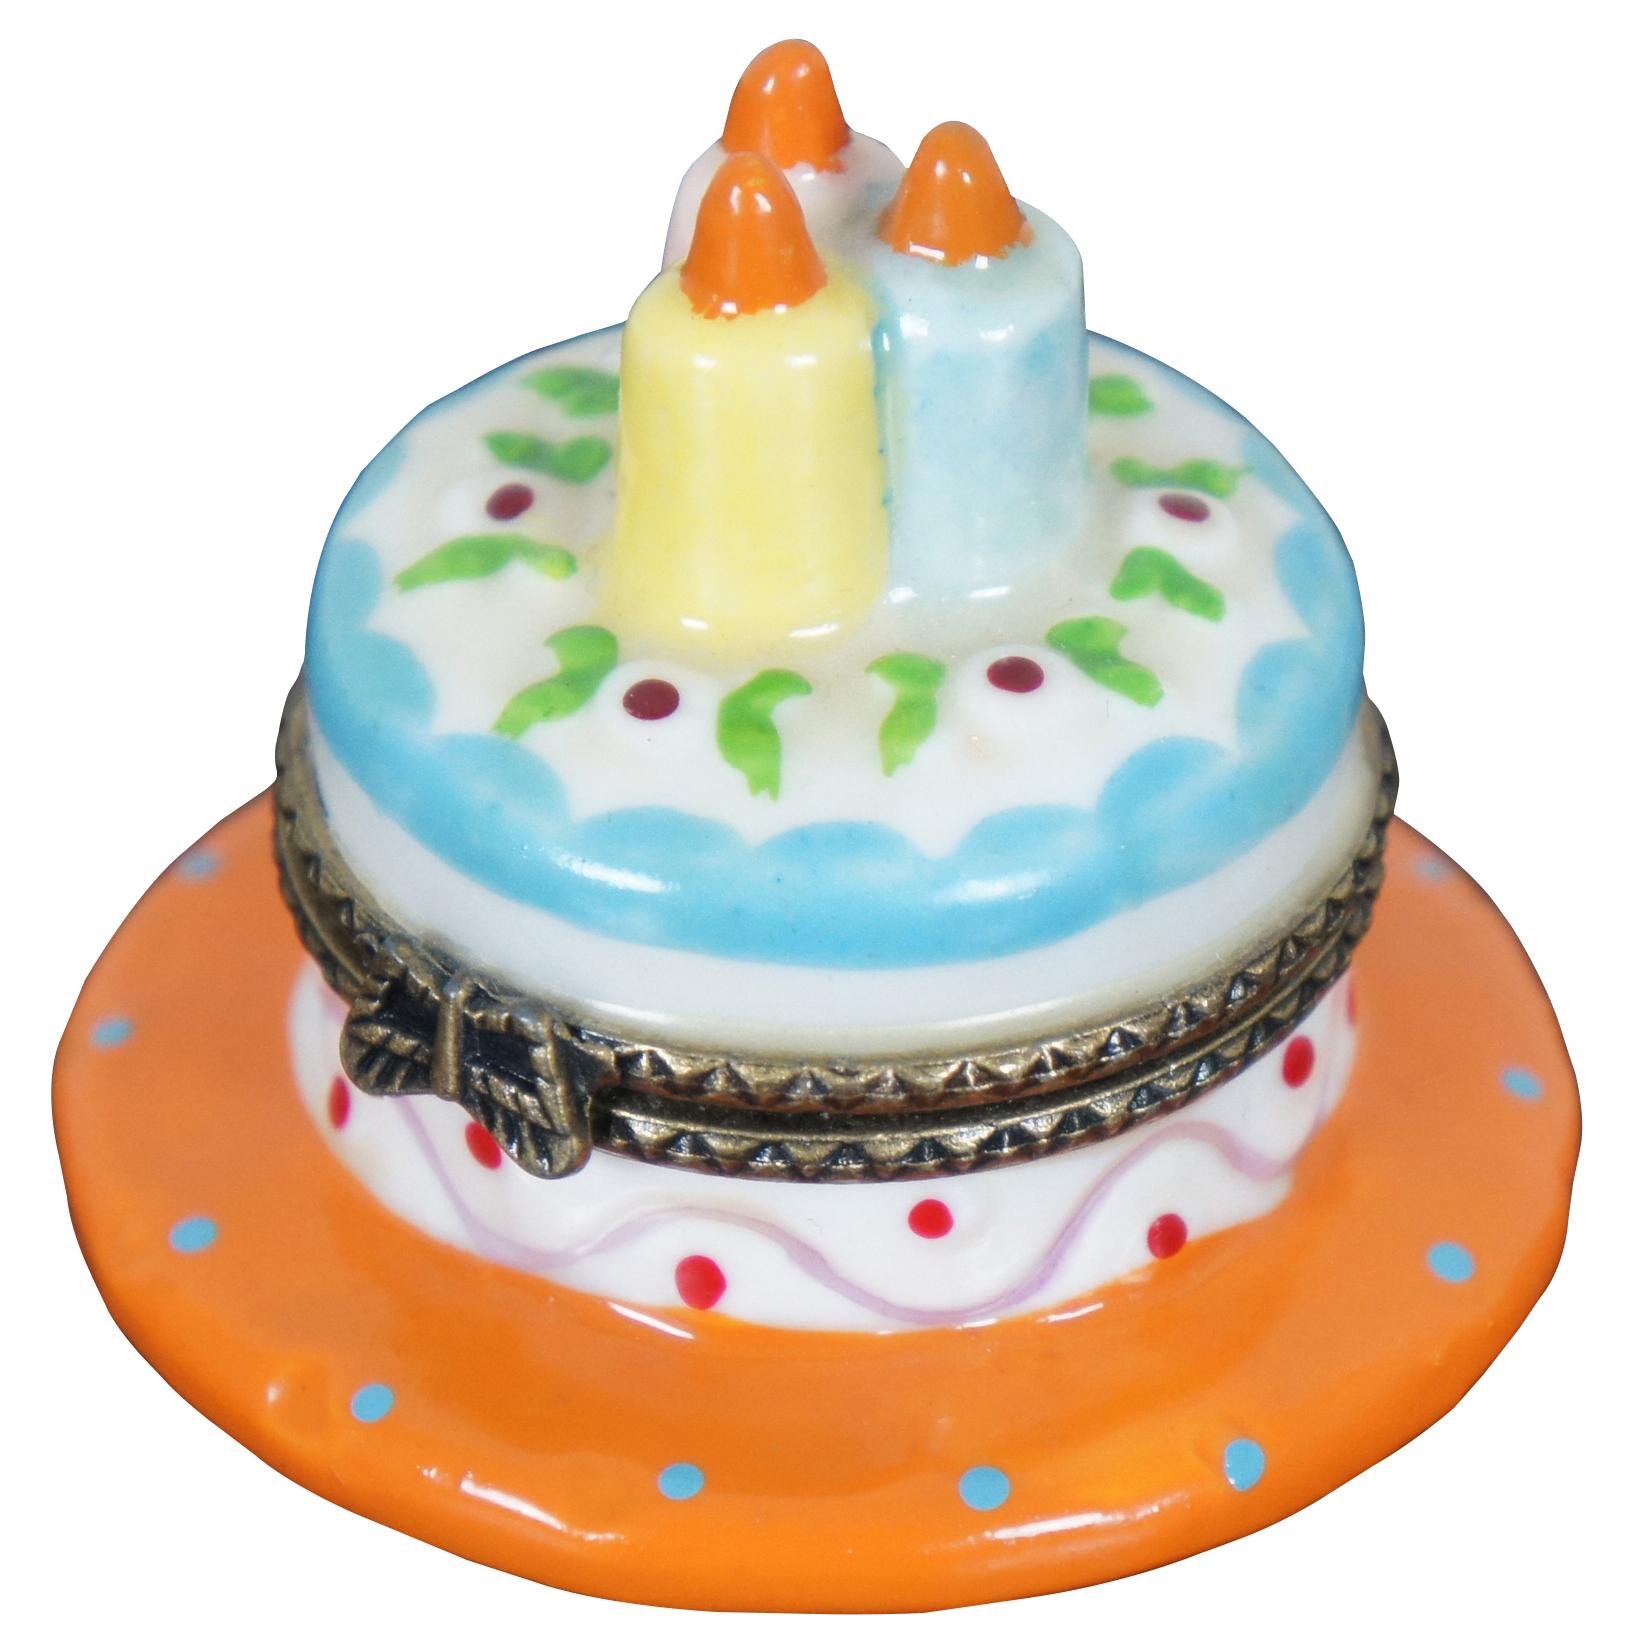 Vintage Nomoges porcelain trinket or pill box shapes like a blue and white birthday cake on an orange plate with three candles.